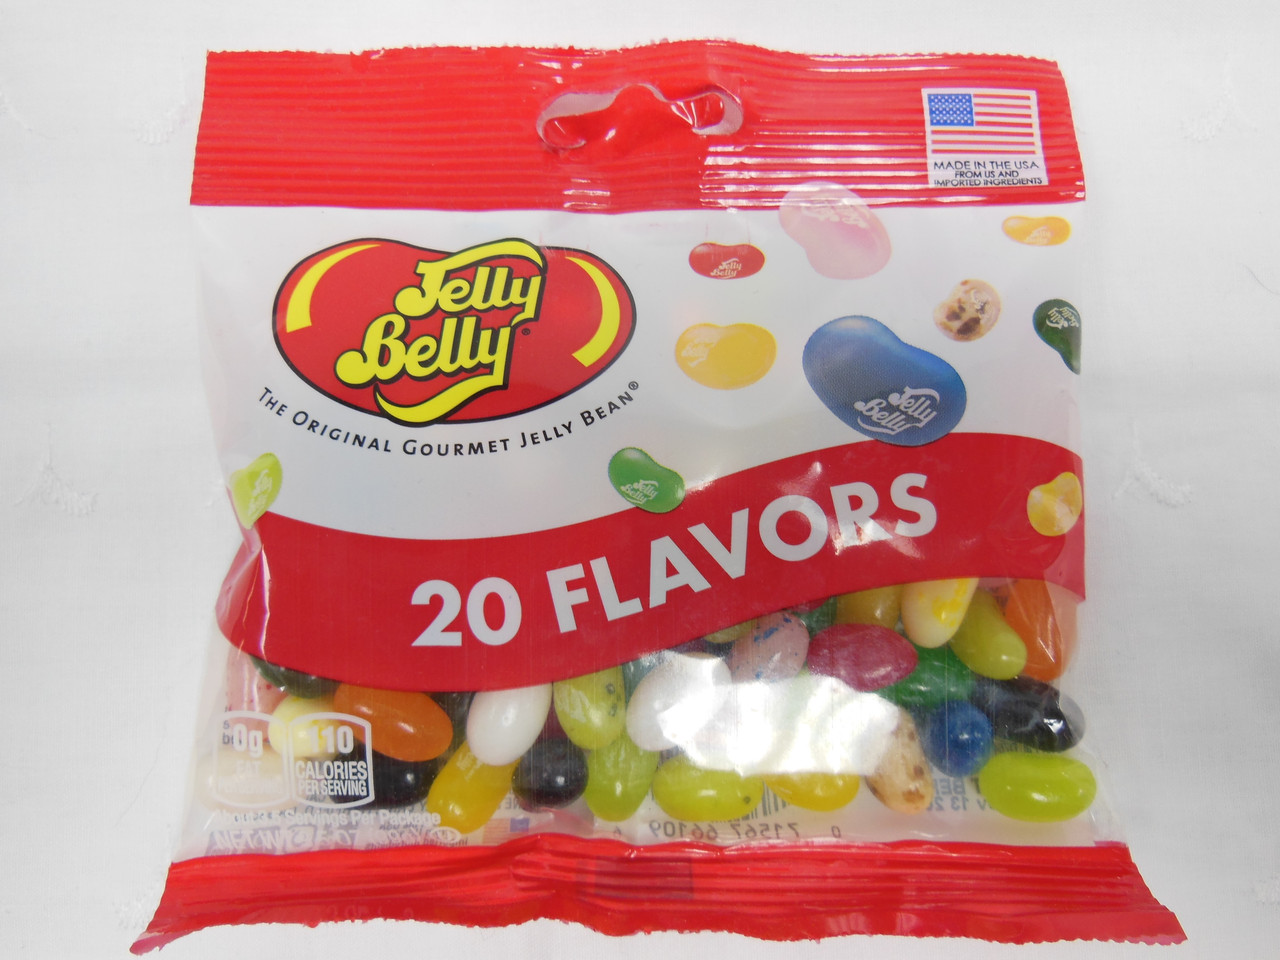 Jelly Belly 20 Flavors Jelly Beans 3.5oz (99g) Manufacturer's Bag